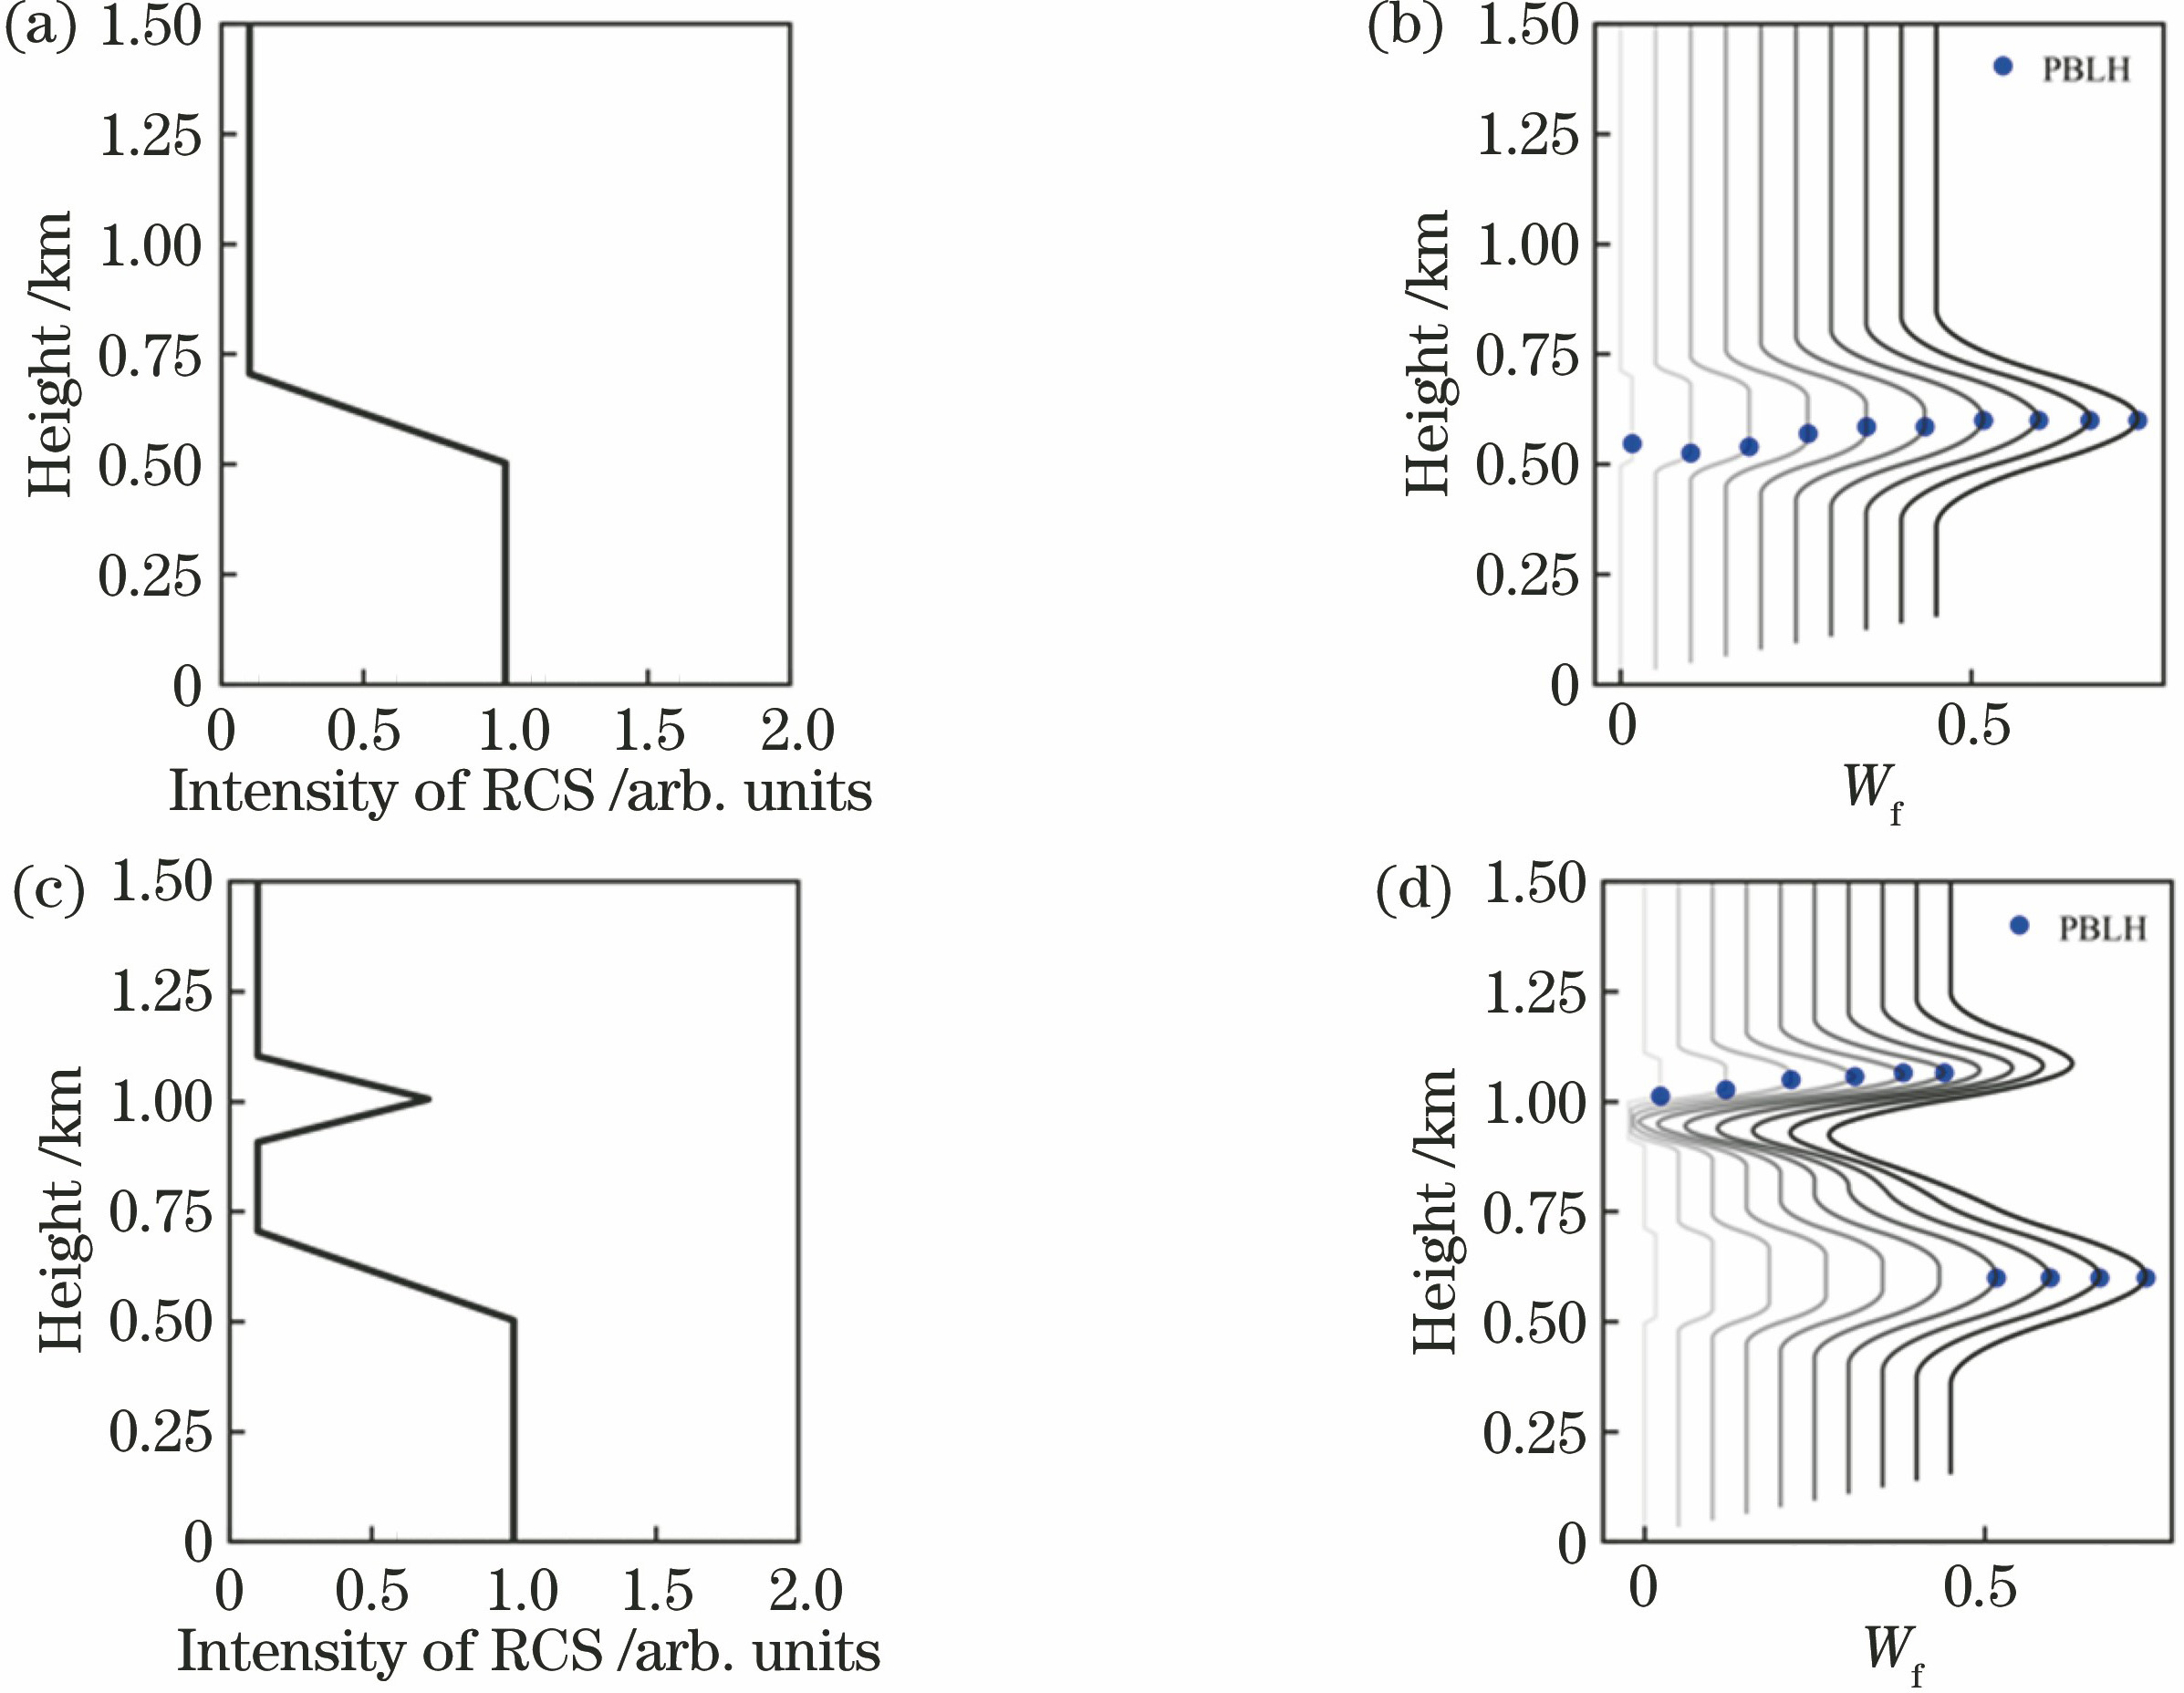 Theoretical calculation of PBLH retrieved by WCT from simulated RCS. (a)(b) Simulated RCS intensity and corresponding PBLH profile without a backscatter layer above PBLH; (c)(d) simulated RCS intensity and corresponding PBLH with a backscatter layer above PBLH